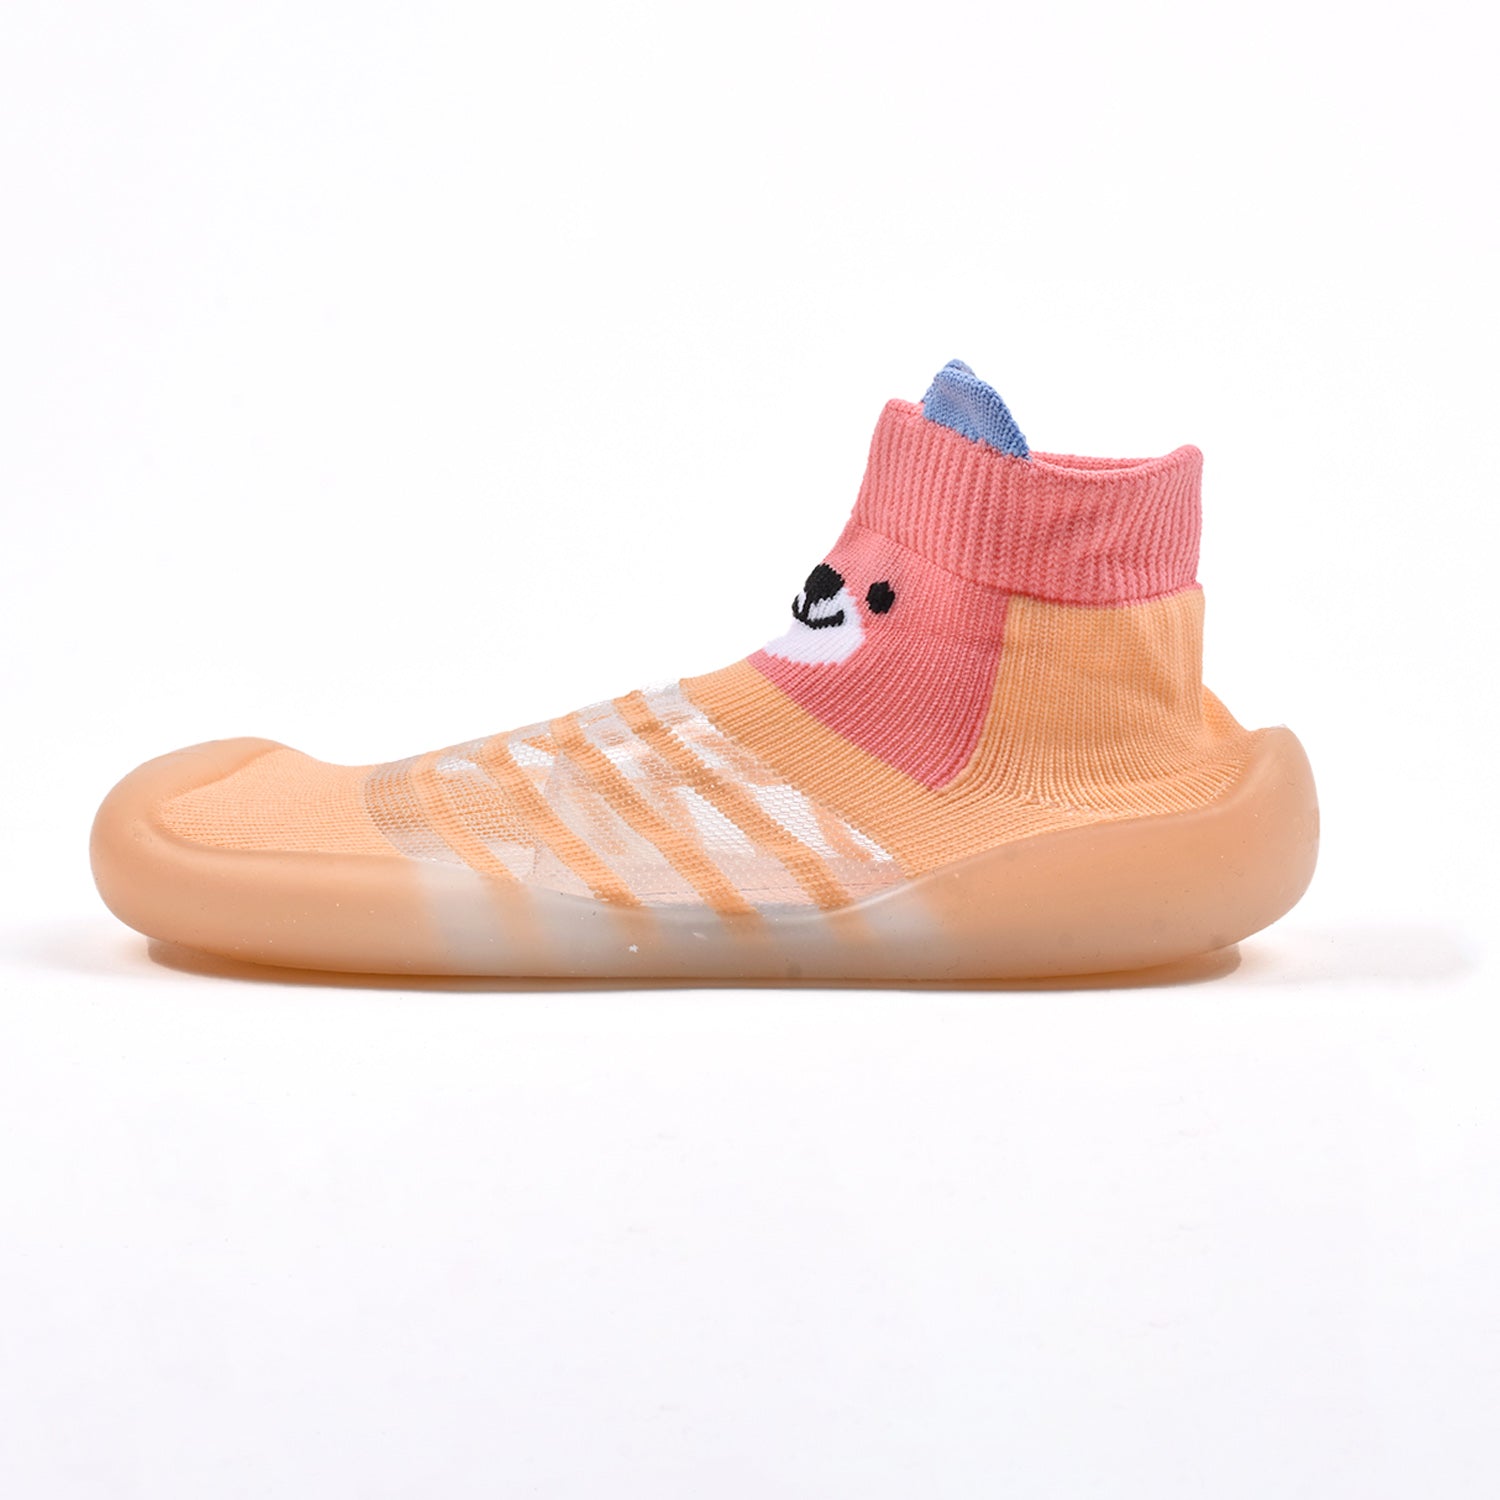 Baby Toddler Sock Shoes Soft Silicone Sole Shoes Breathable Cotton Shoes Anti-Slip for Kids Baby (Orange)